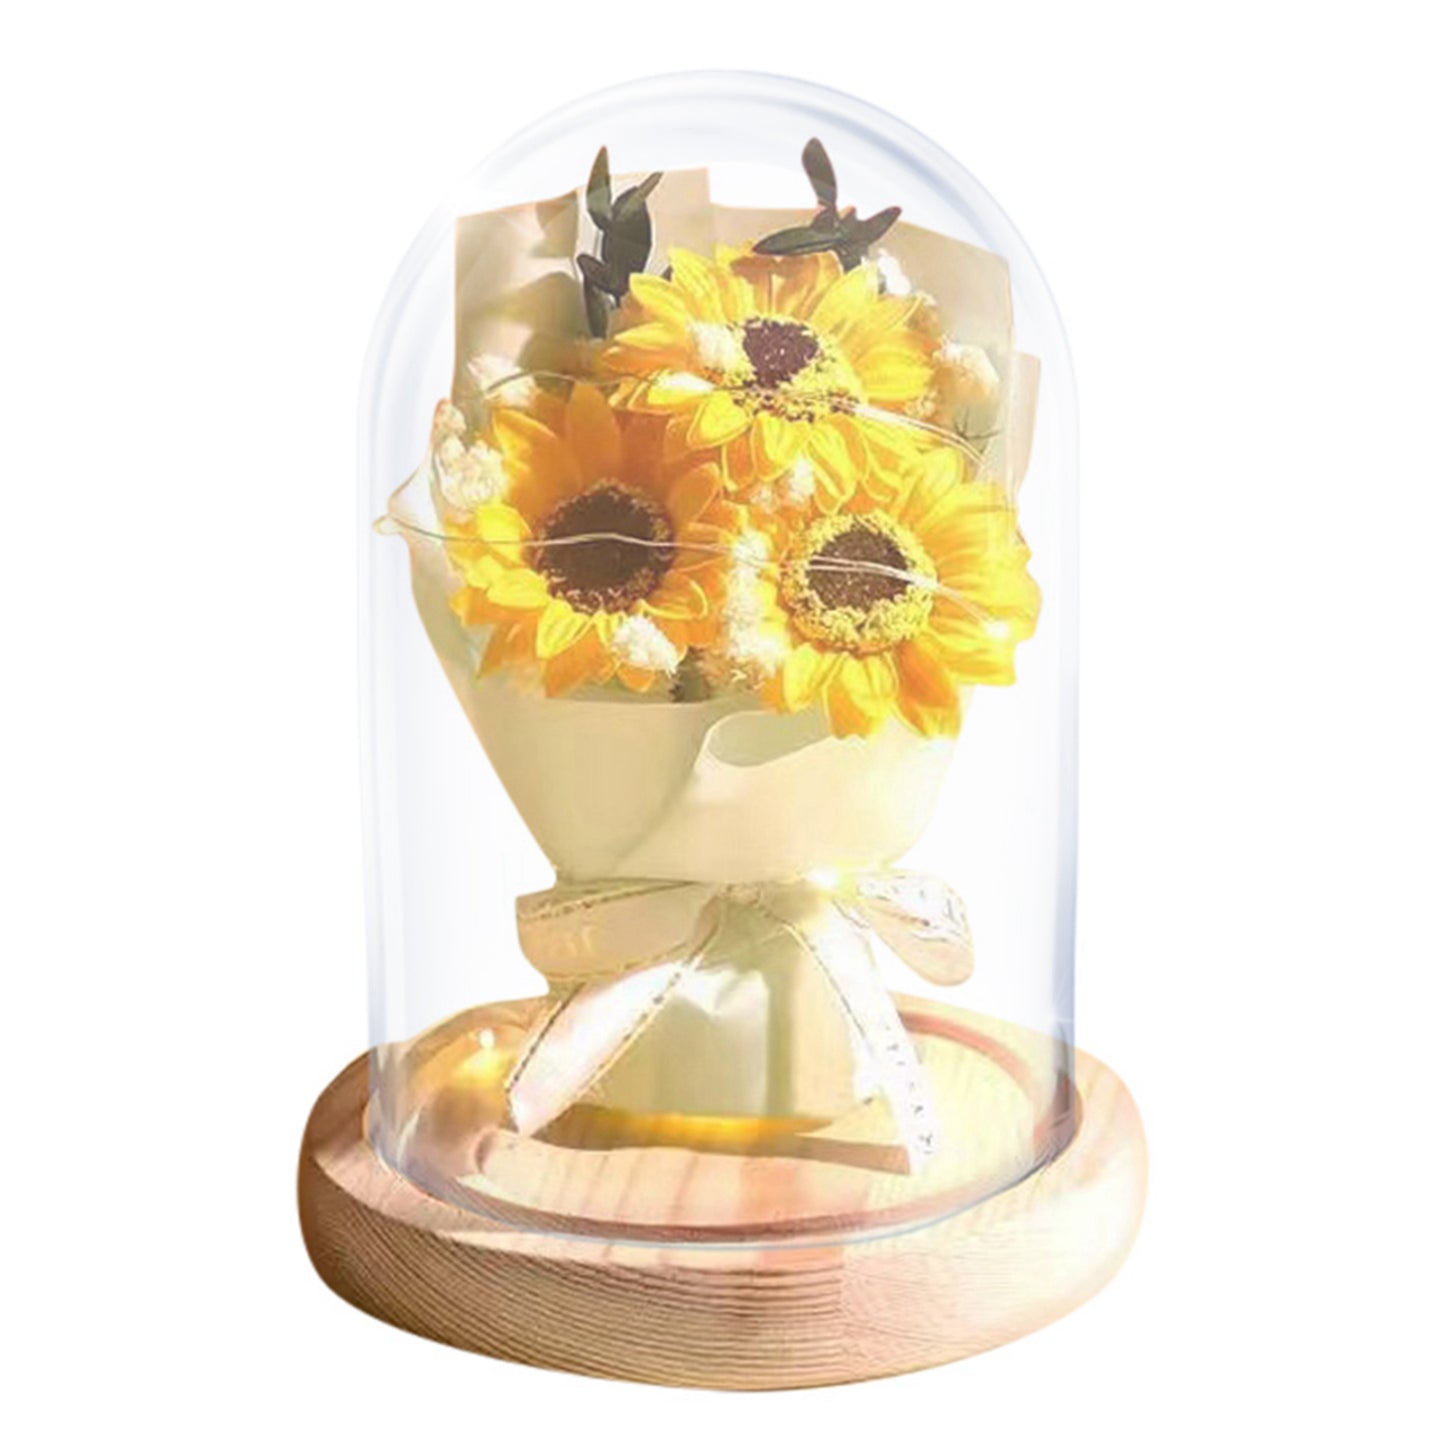 Preserved Real Rose Immortal Flowers in Glass Dome 4-pack